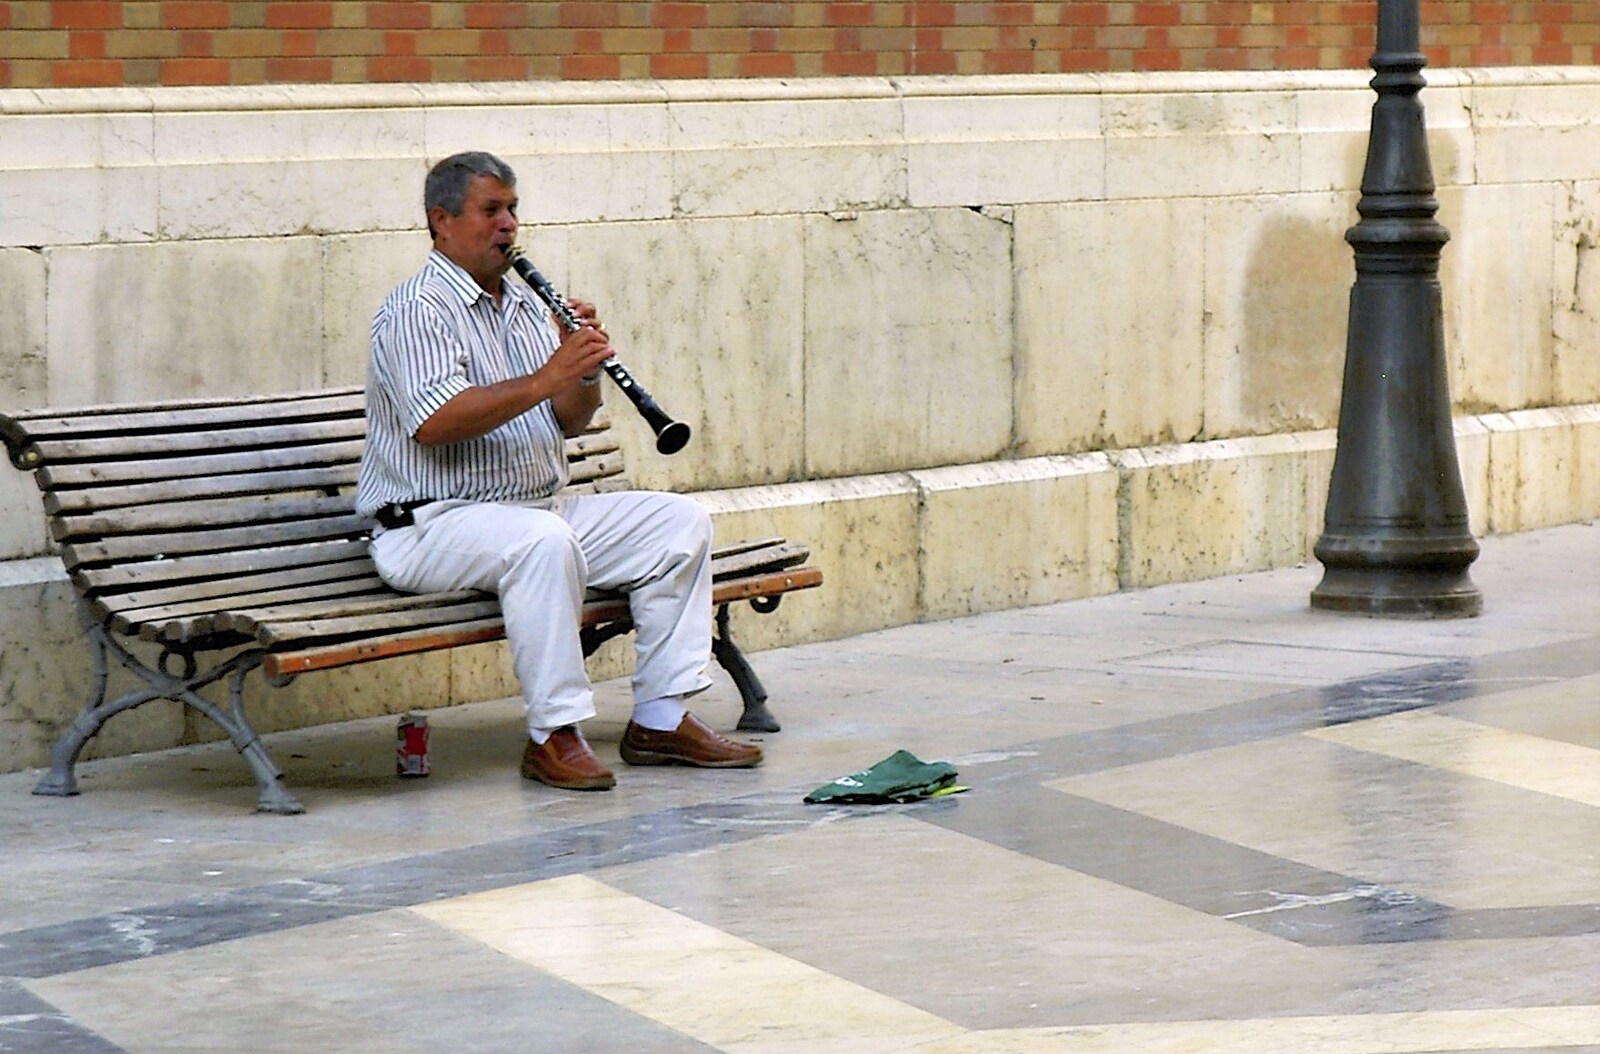 A busking clarinet from Working at Telefónica, Malaga, Spain - 6th June 2006